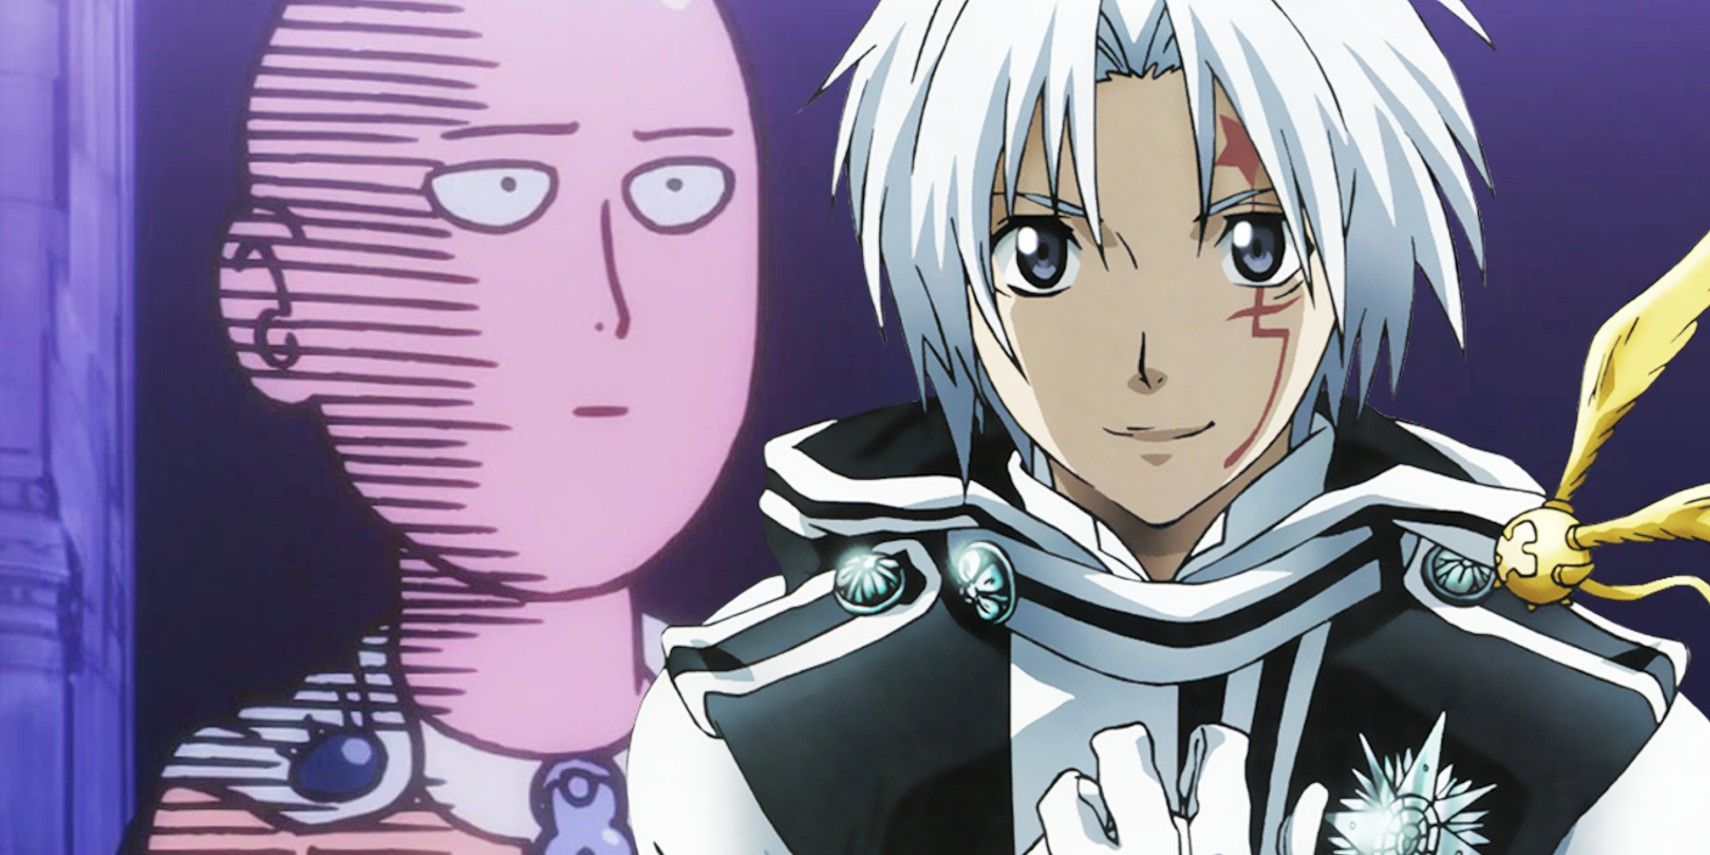 10 Worst Anime Adaptations That Ruined The Original Work